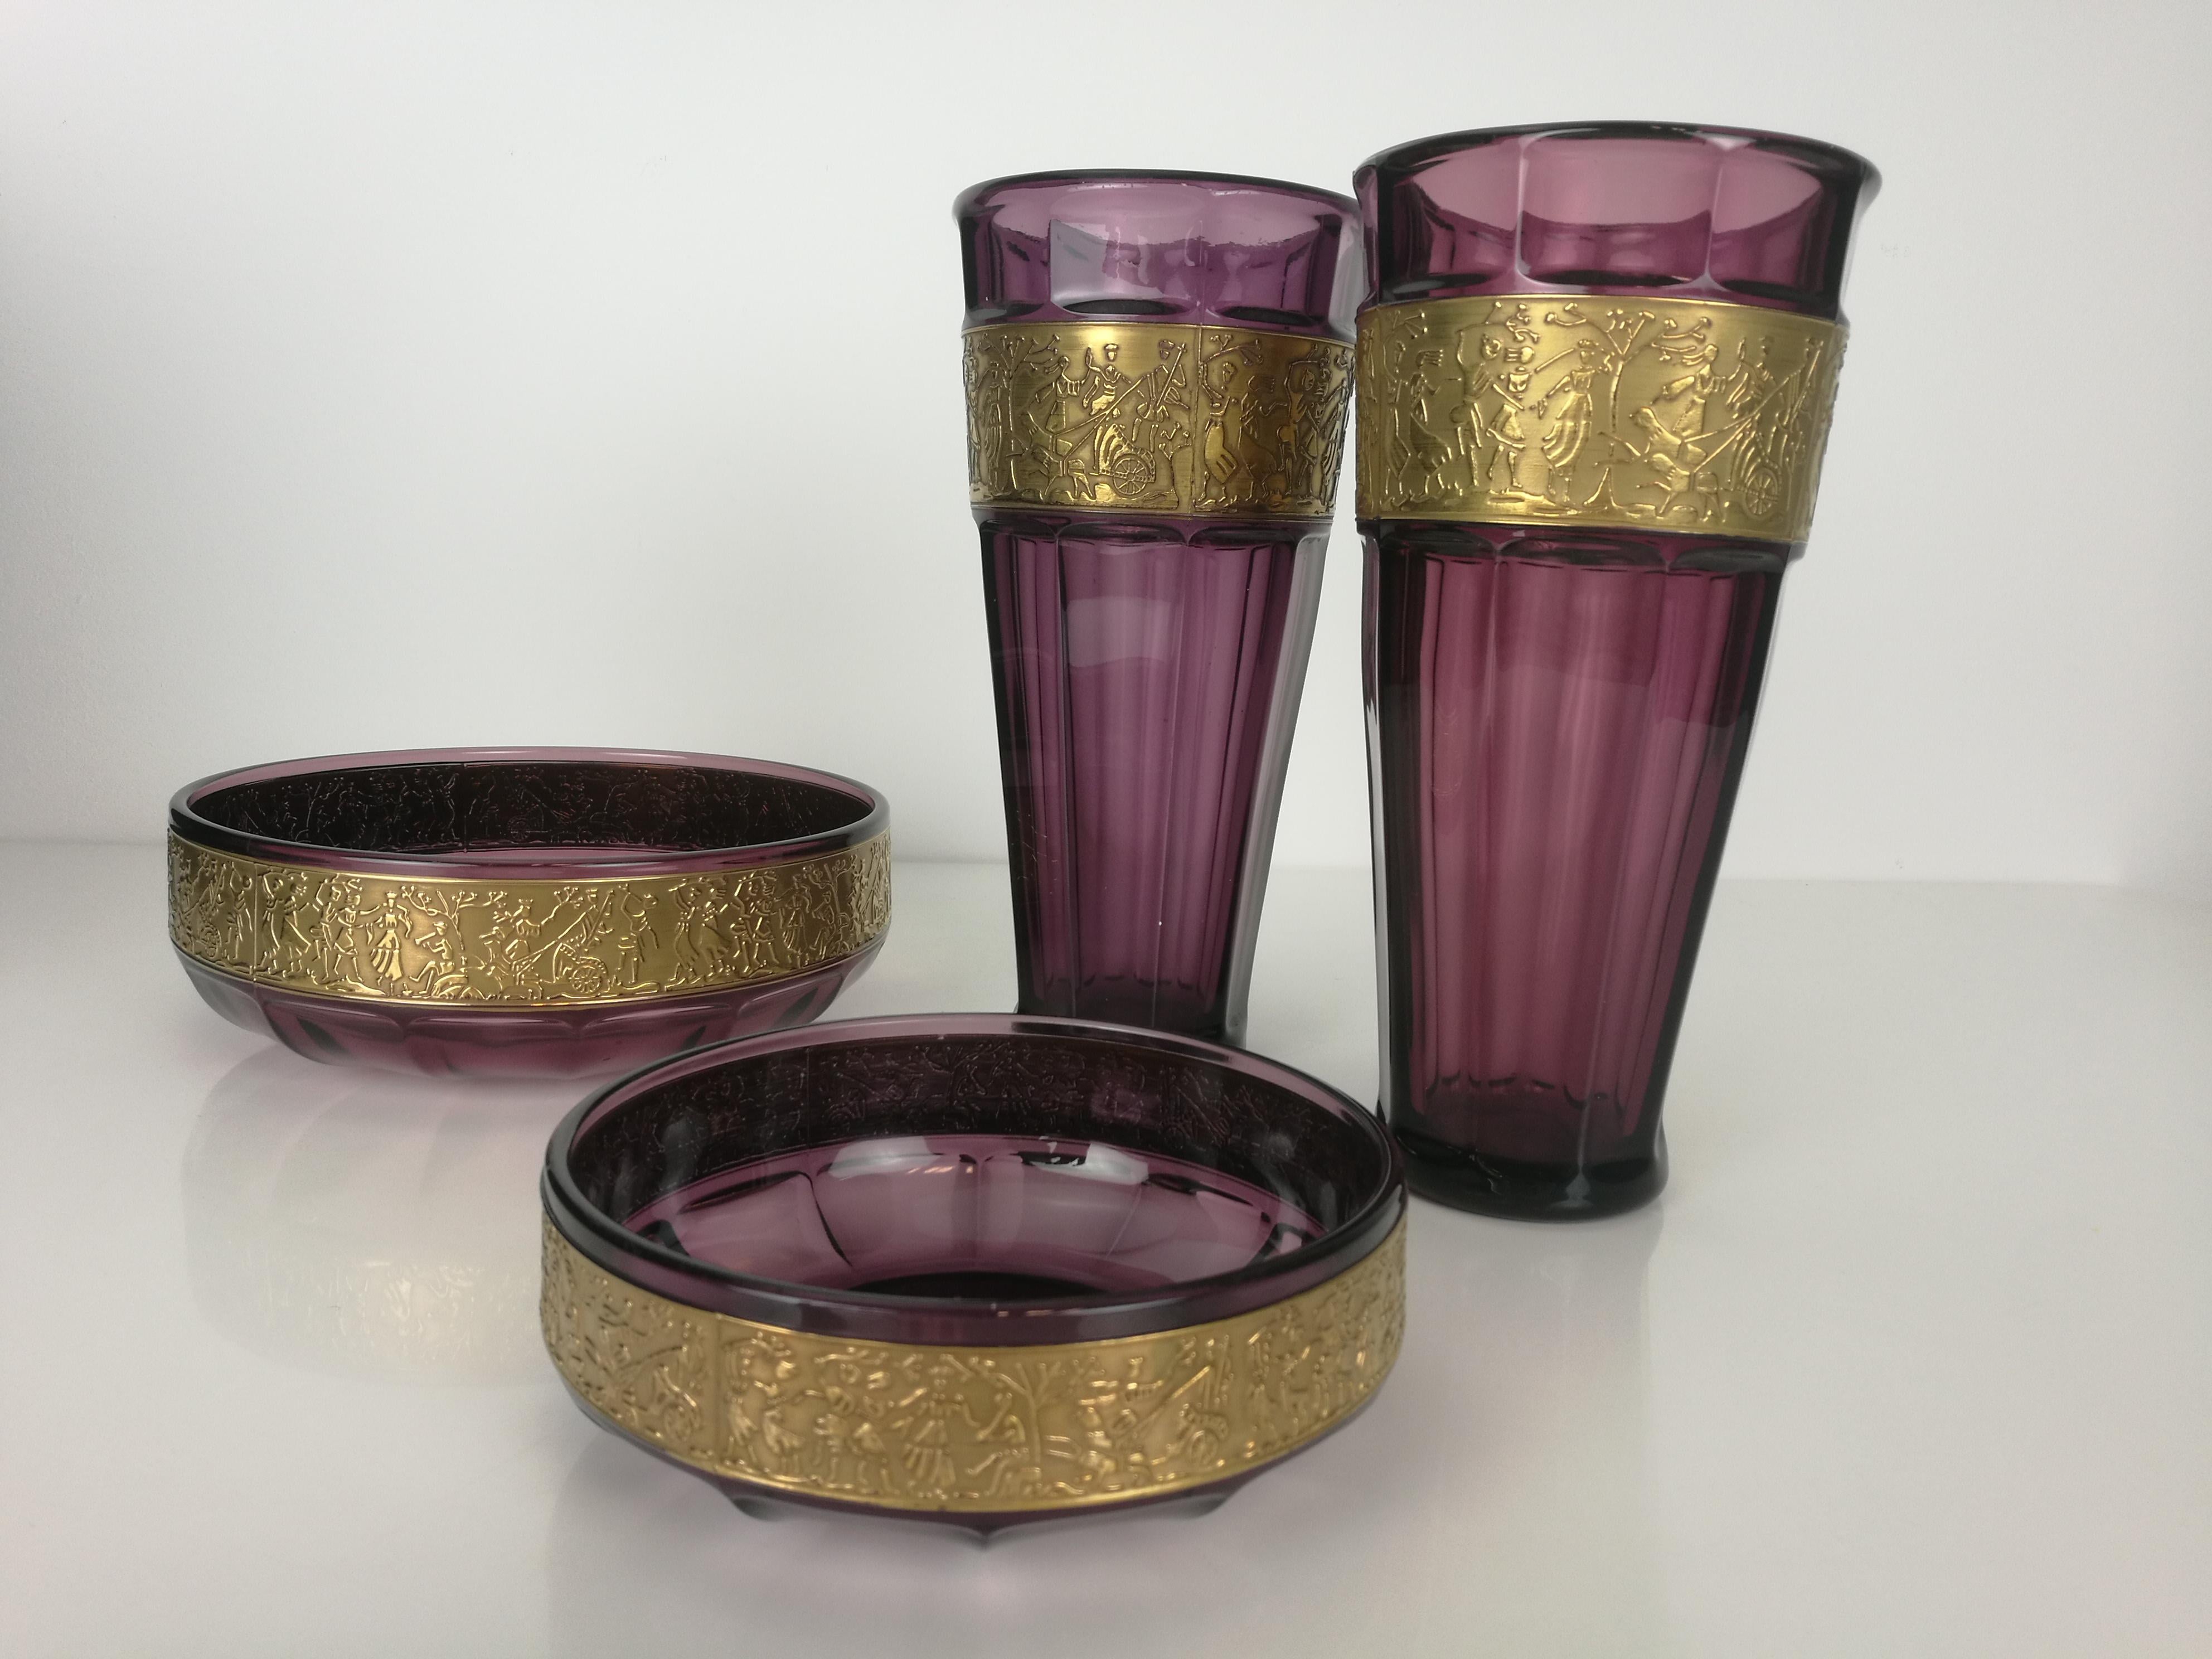 A beautiful Moser amethyst centerpiece set. Two vases and two bowls. Hand blown purple crystal with a wide band around the body, decorated with a cameo cut scene with antique roman chariots, embellished with gold.

Maker: Karlsbader Kristallfabrik